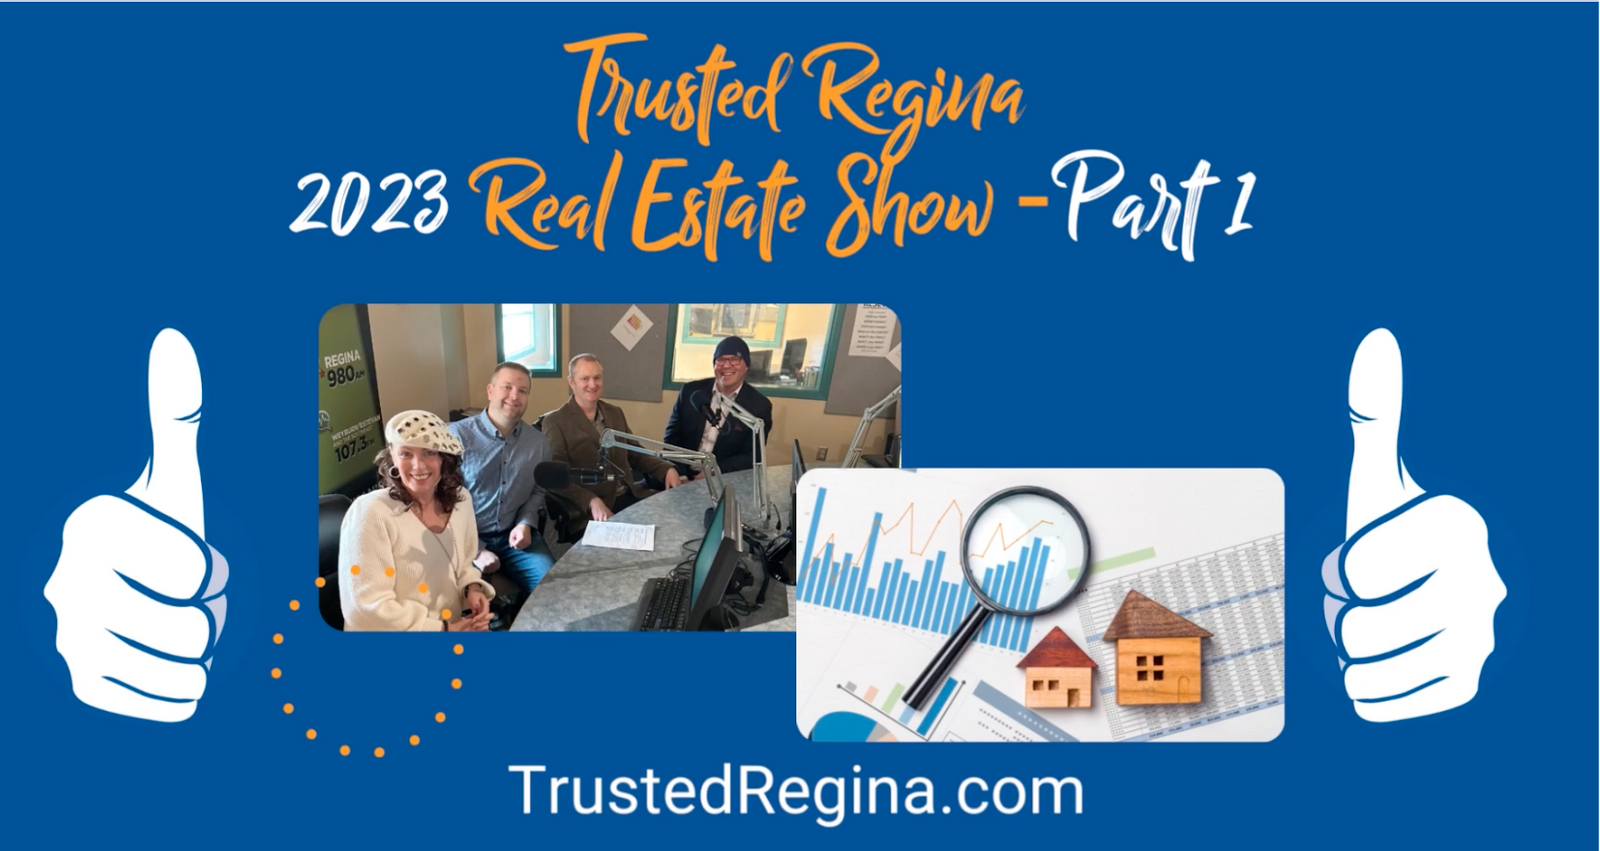 Trusted Regina Talk To The Real Estate Experts Show - Part 1 